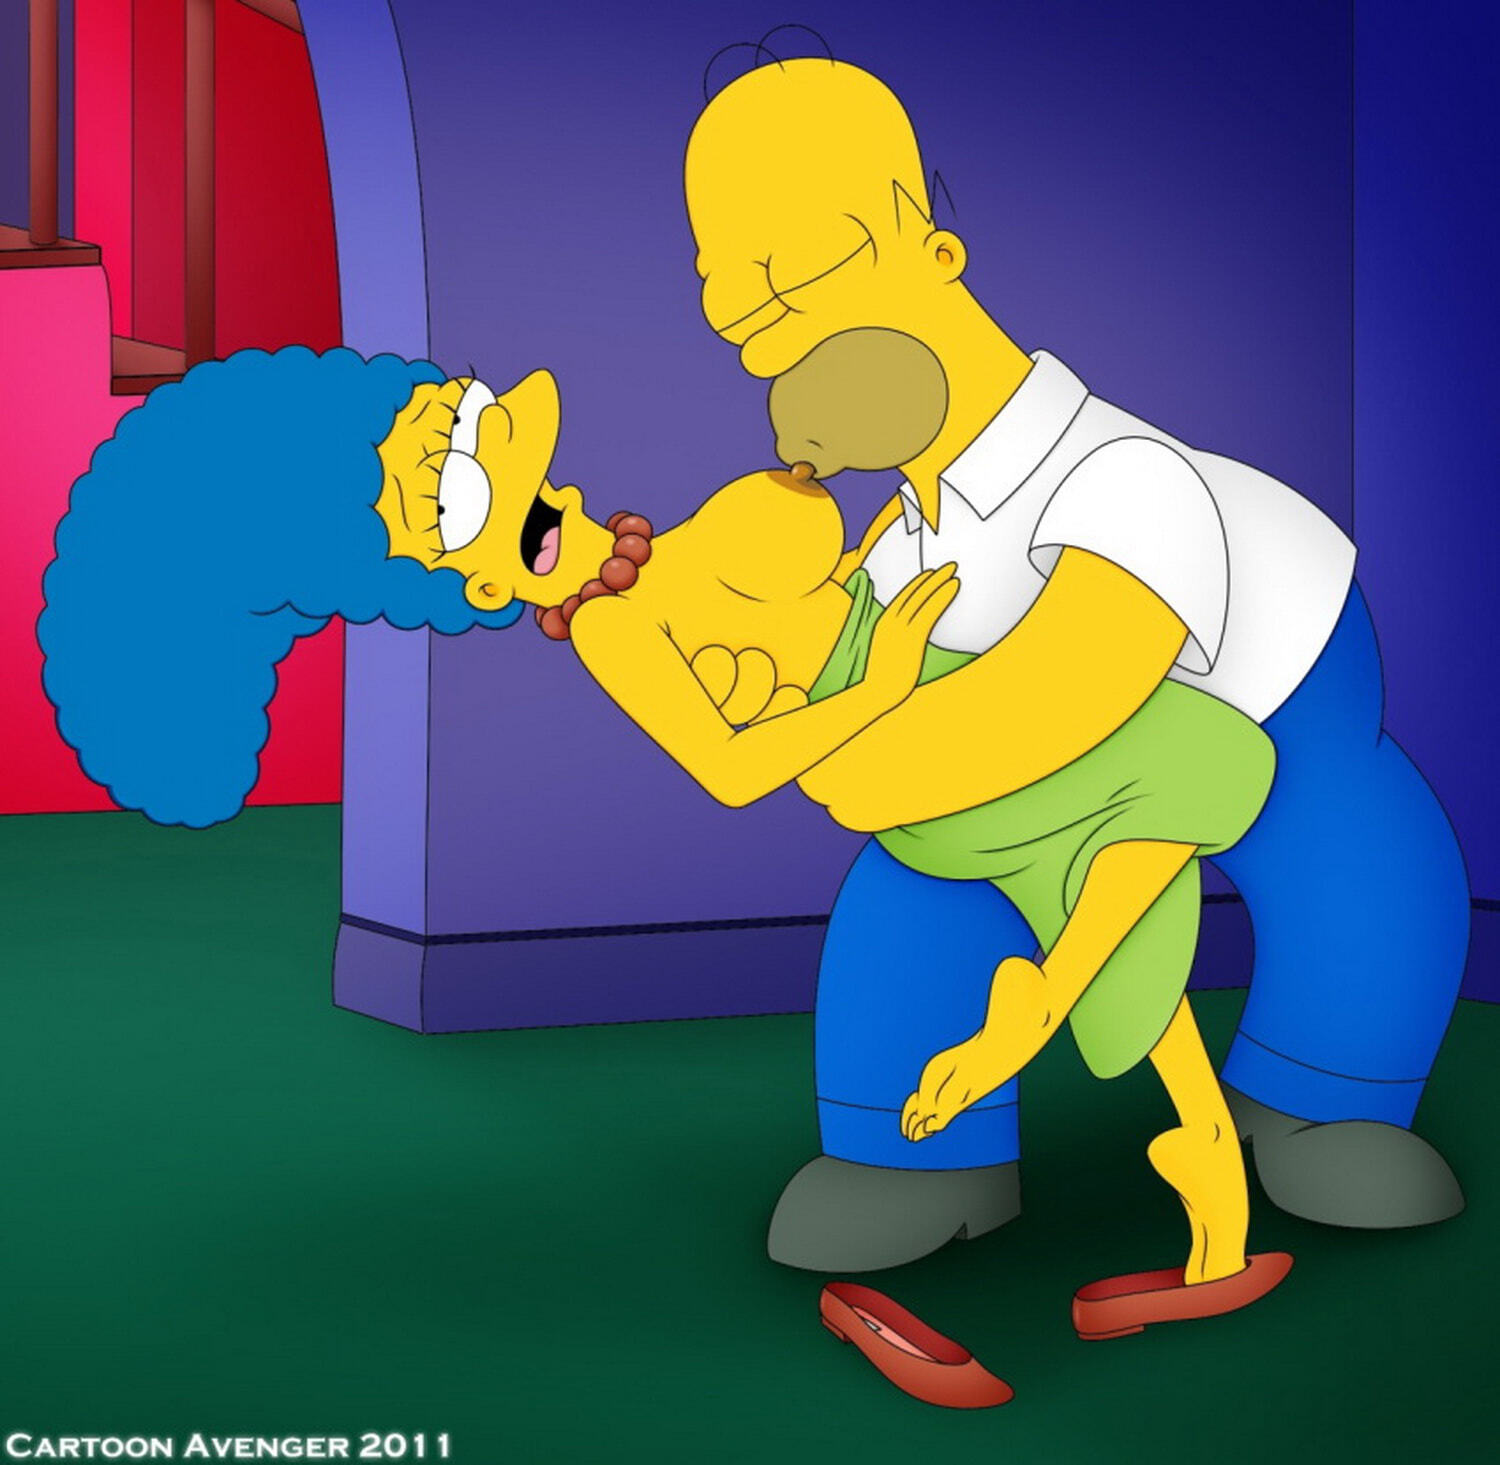 Sucking Cartoon Tits - Homer Simpson and Marge Simpson Nipple Sucking Tits < Your Cartoon Porn